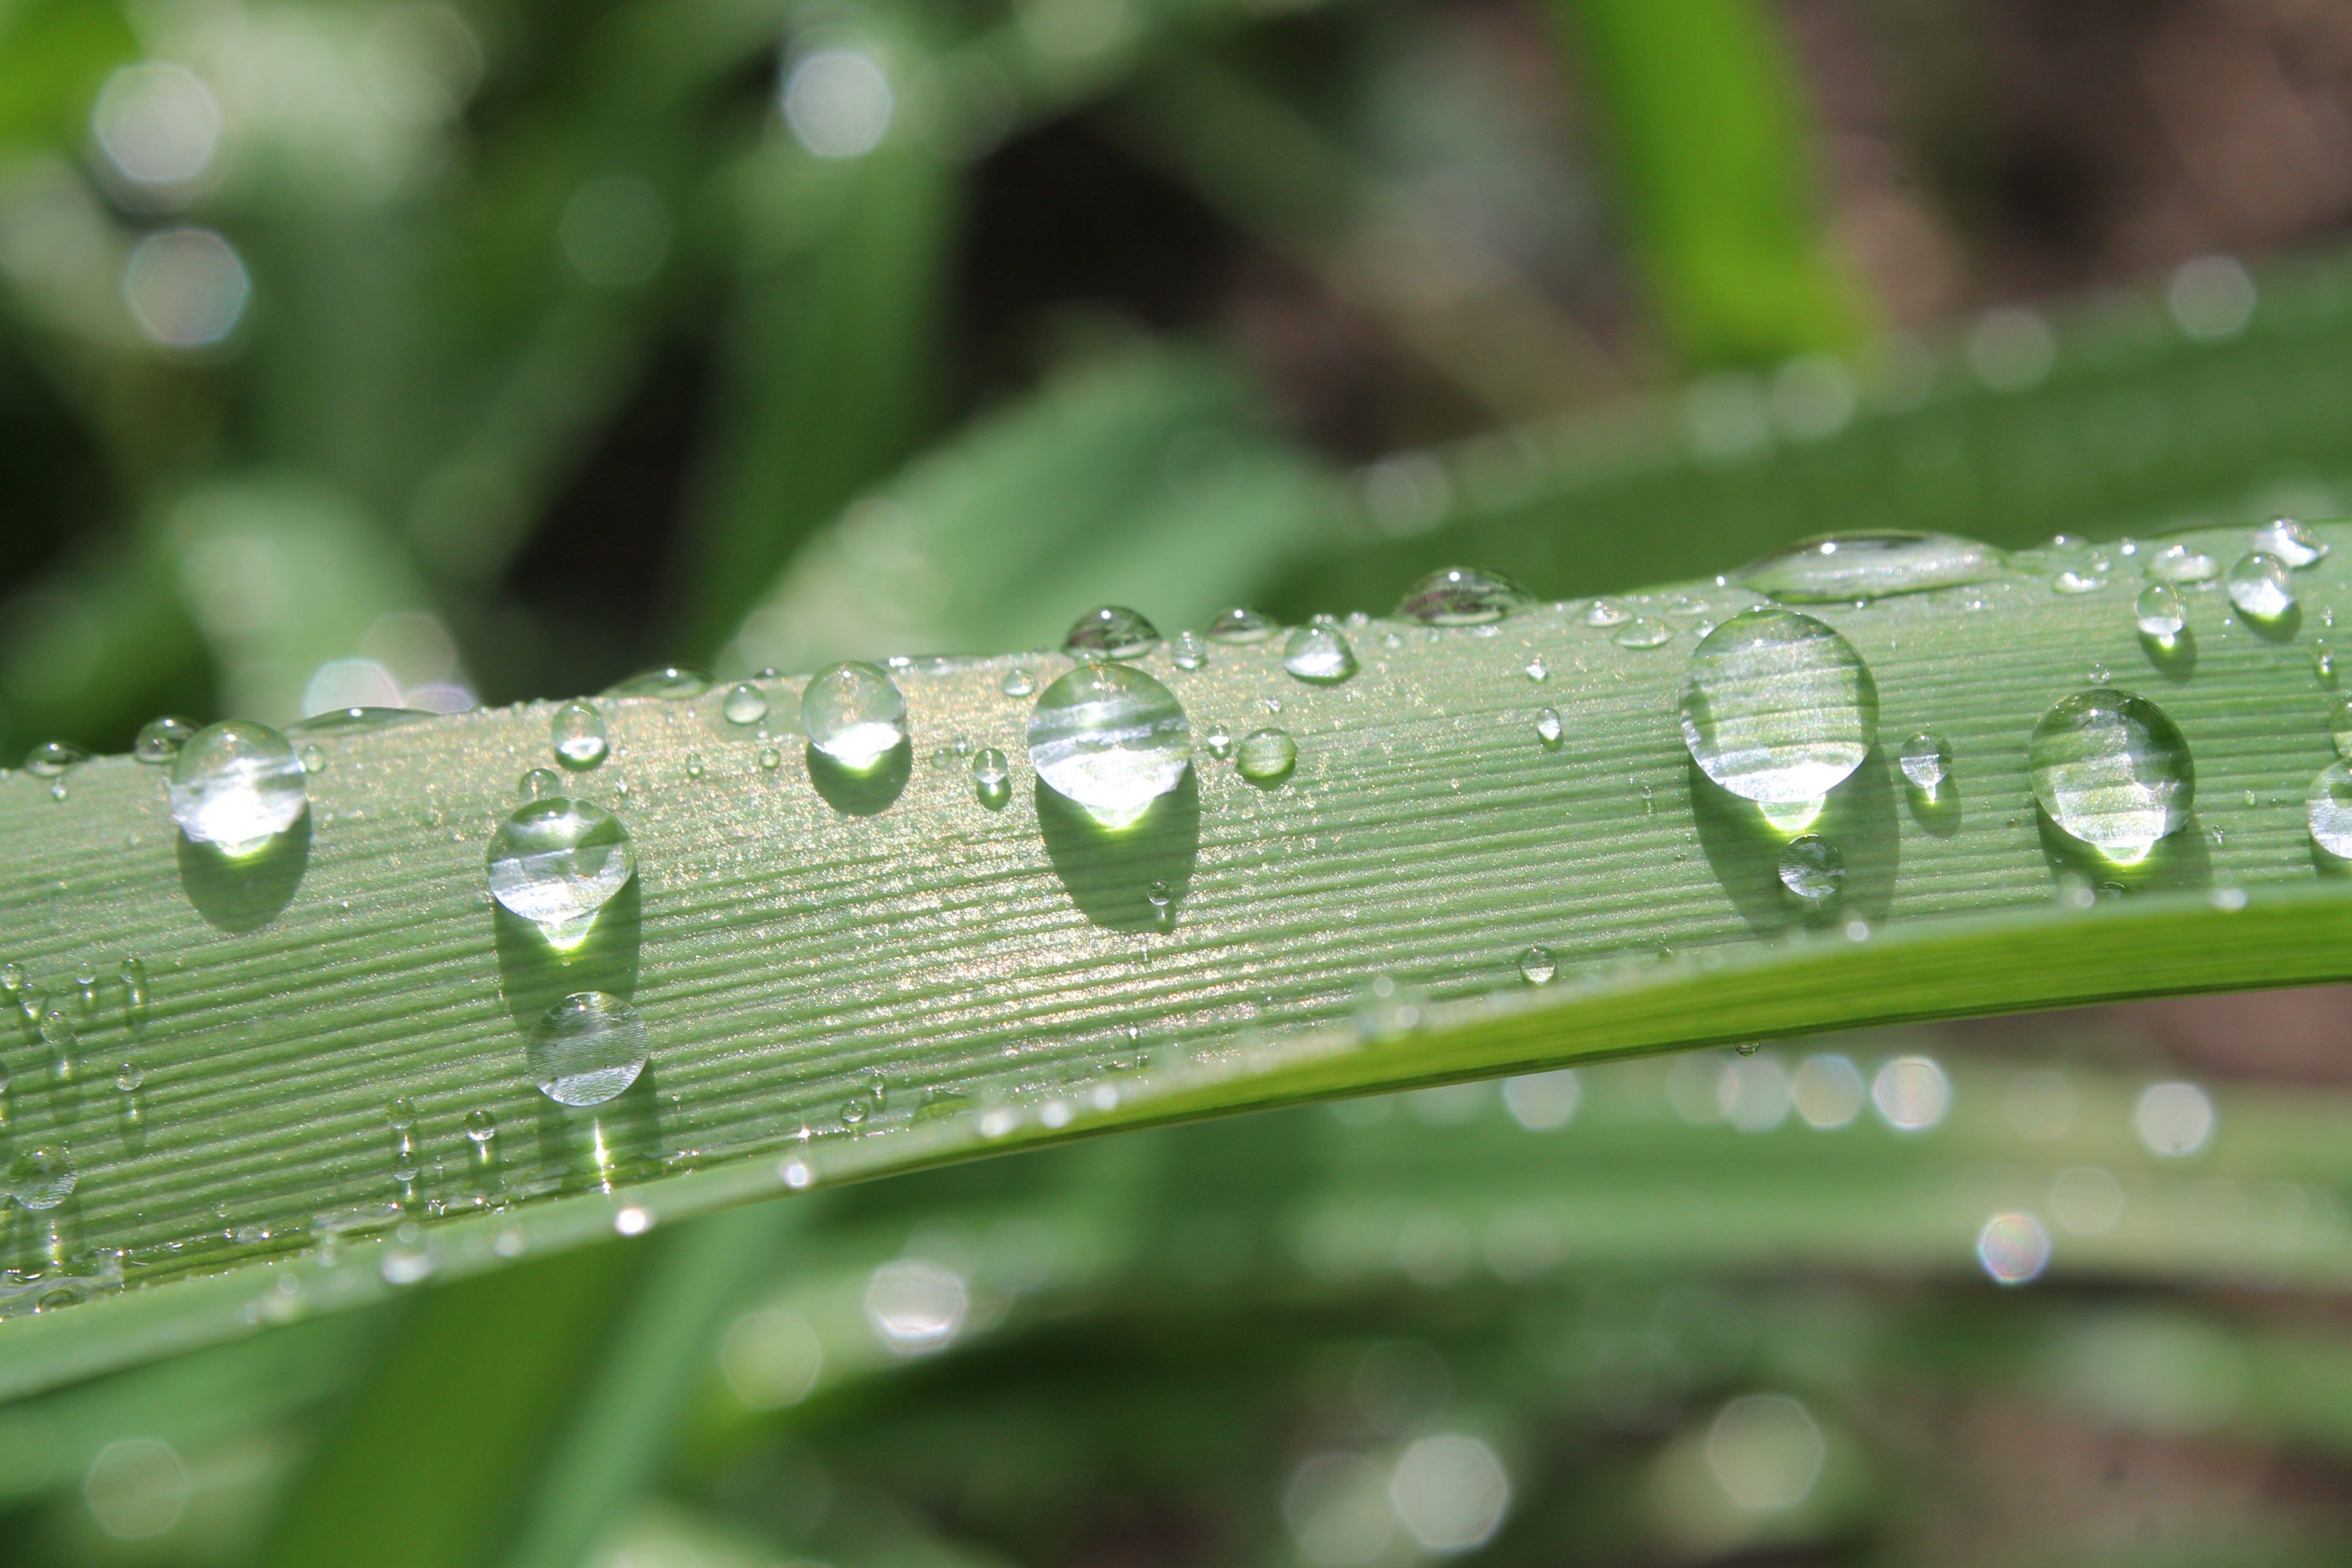 Image shows a close-up photograph of dewdrops on a blade of grass.